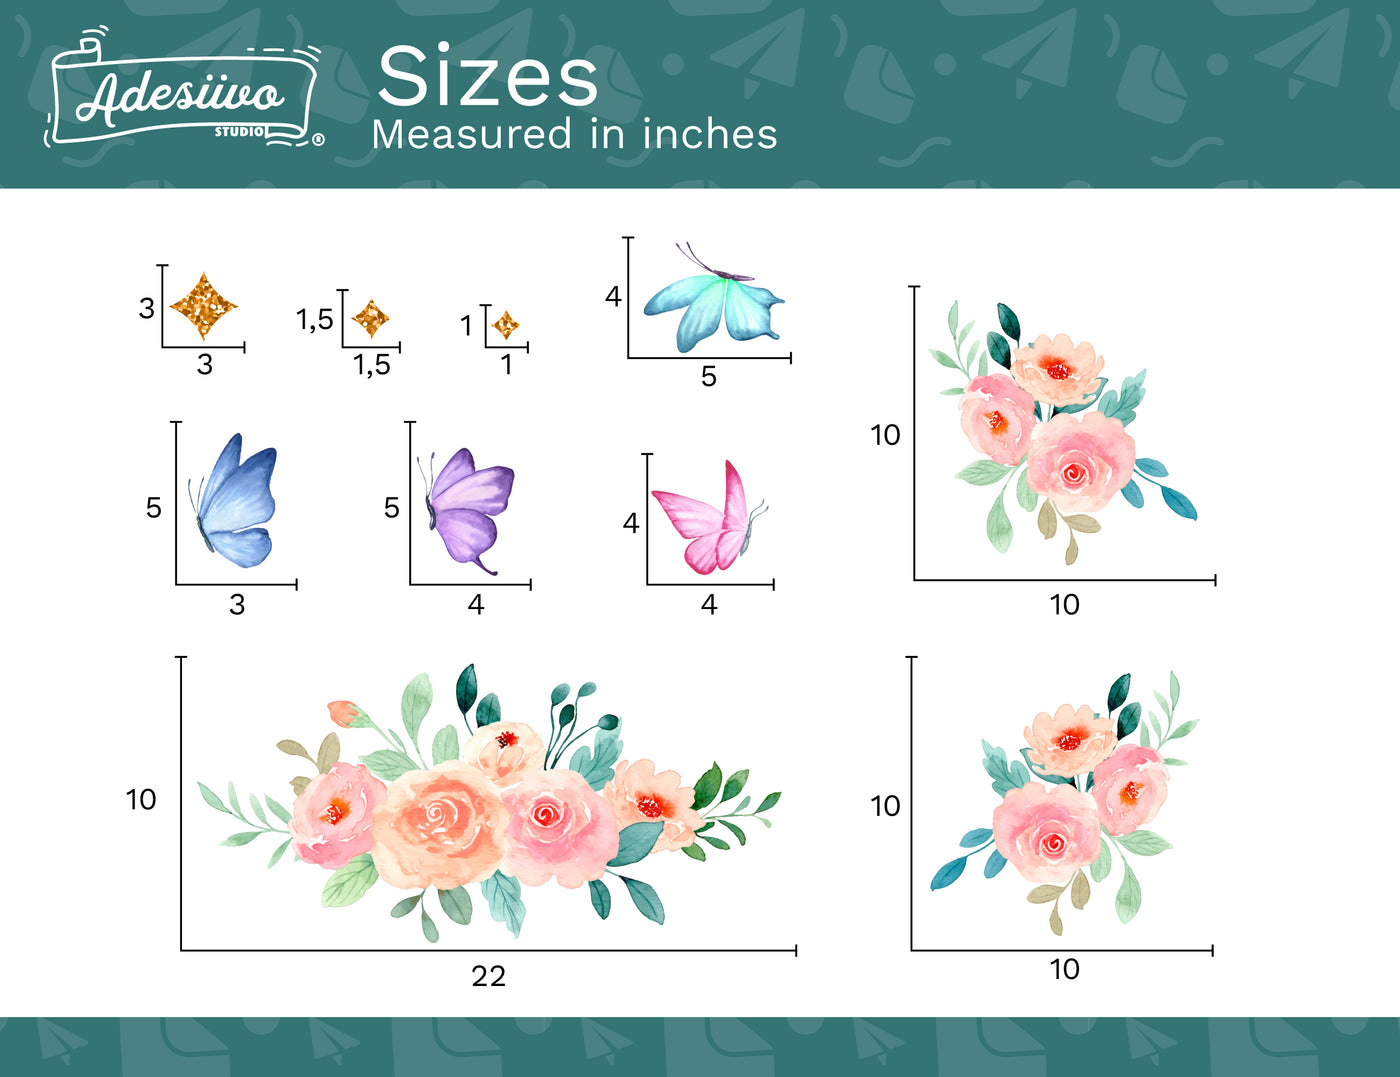 Flower Decals for Walls - Butterfly Stickers - Upgrade Your Custom Name